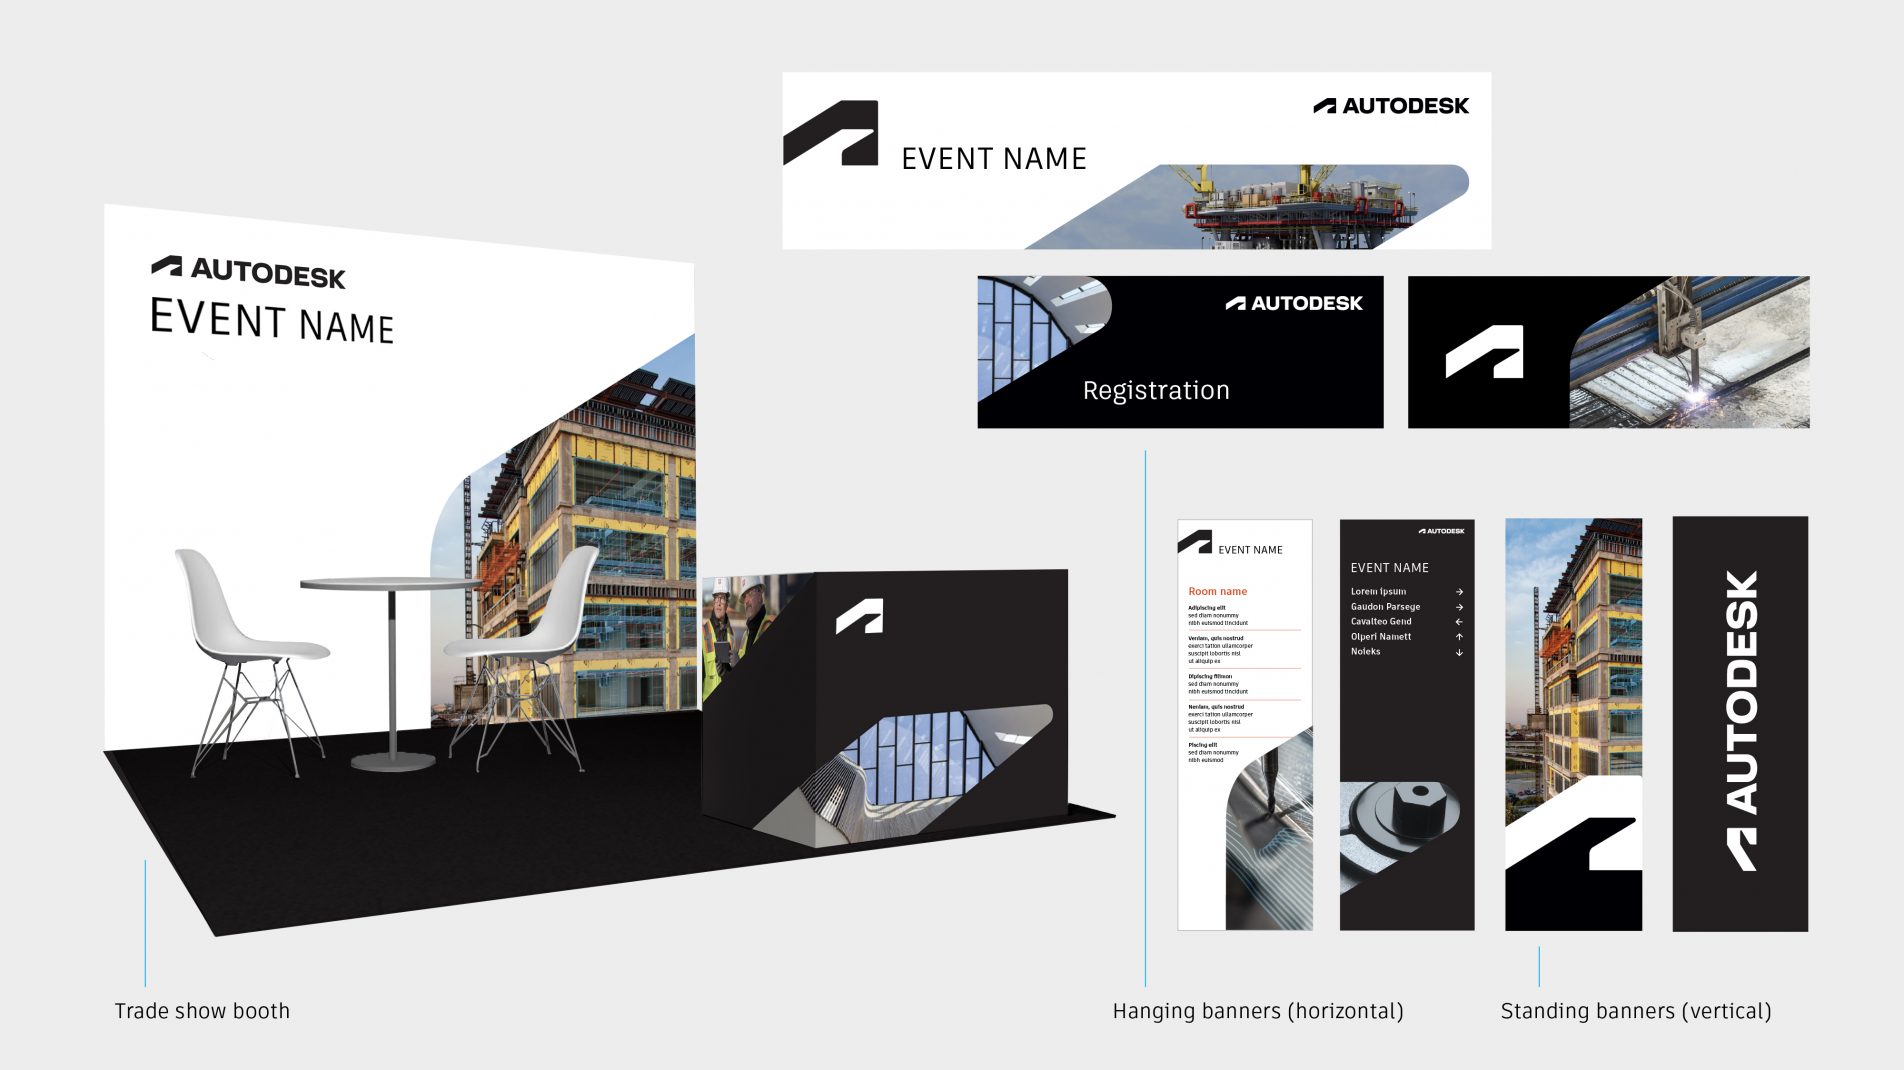 Autodesk physical booth signage examples